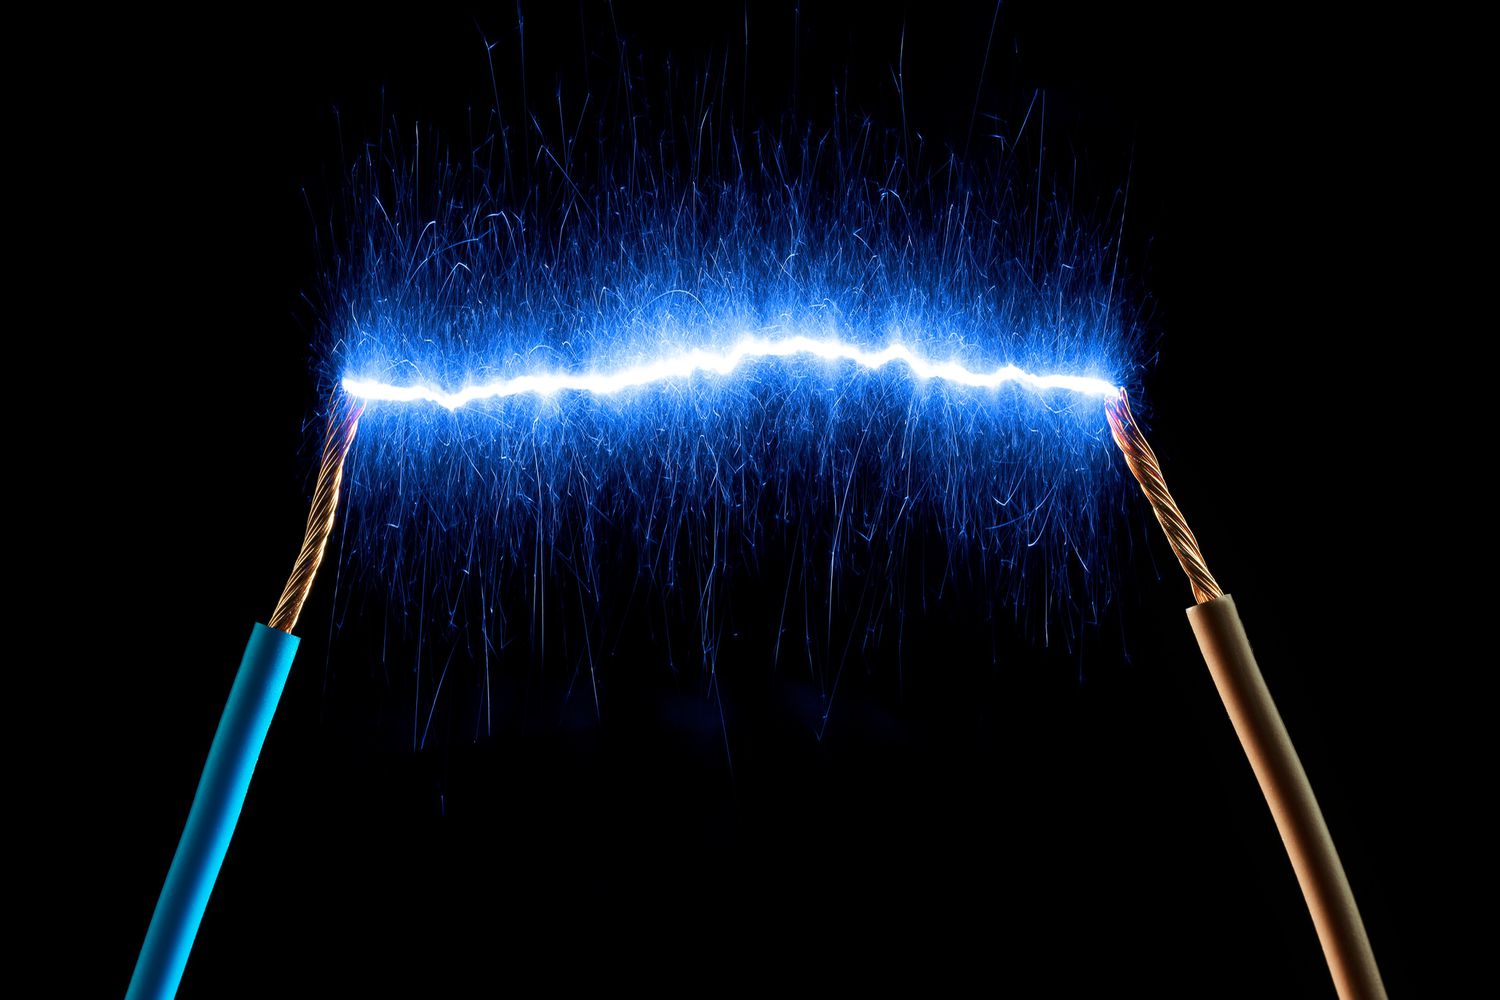 Wires connected by blue sparks